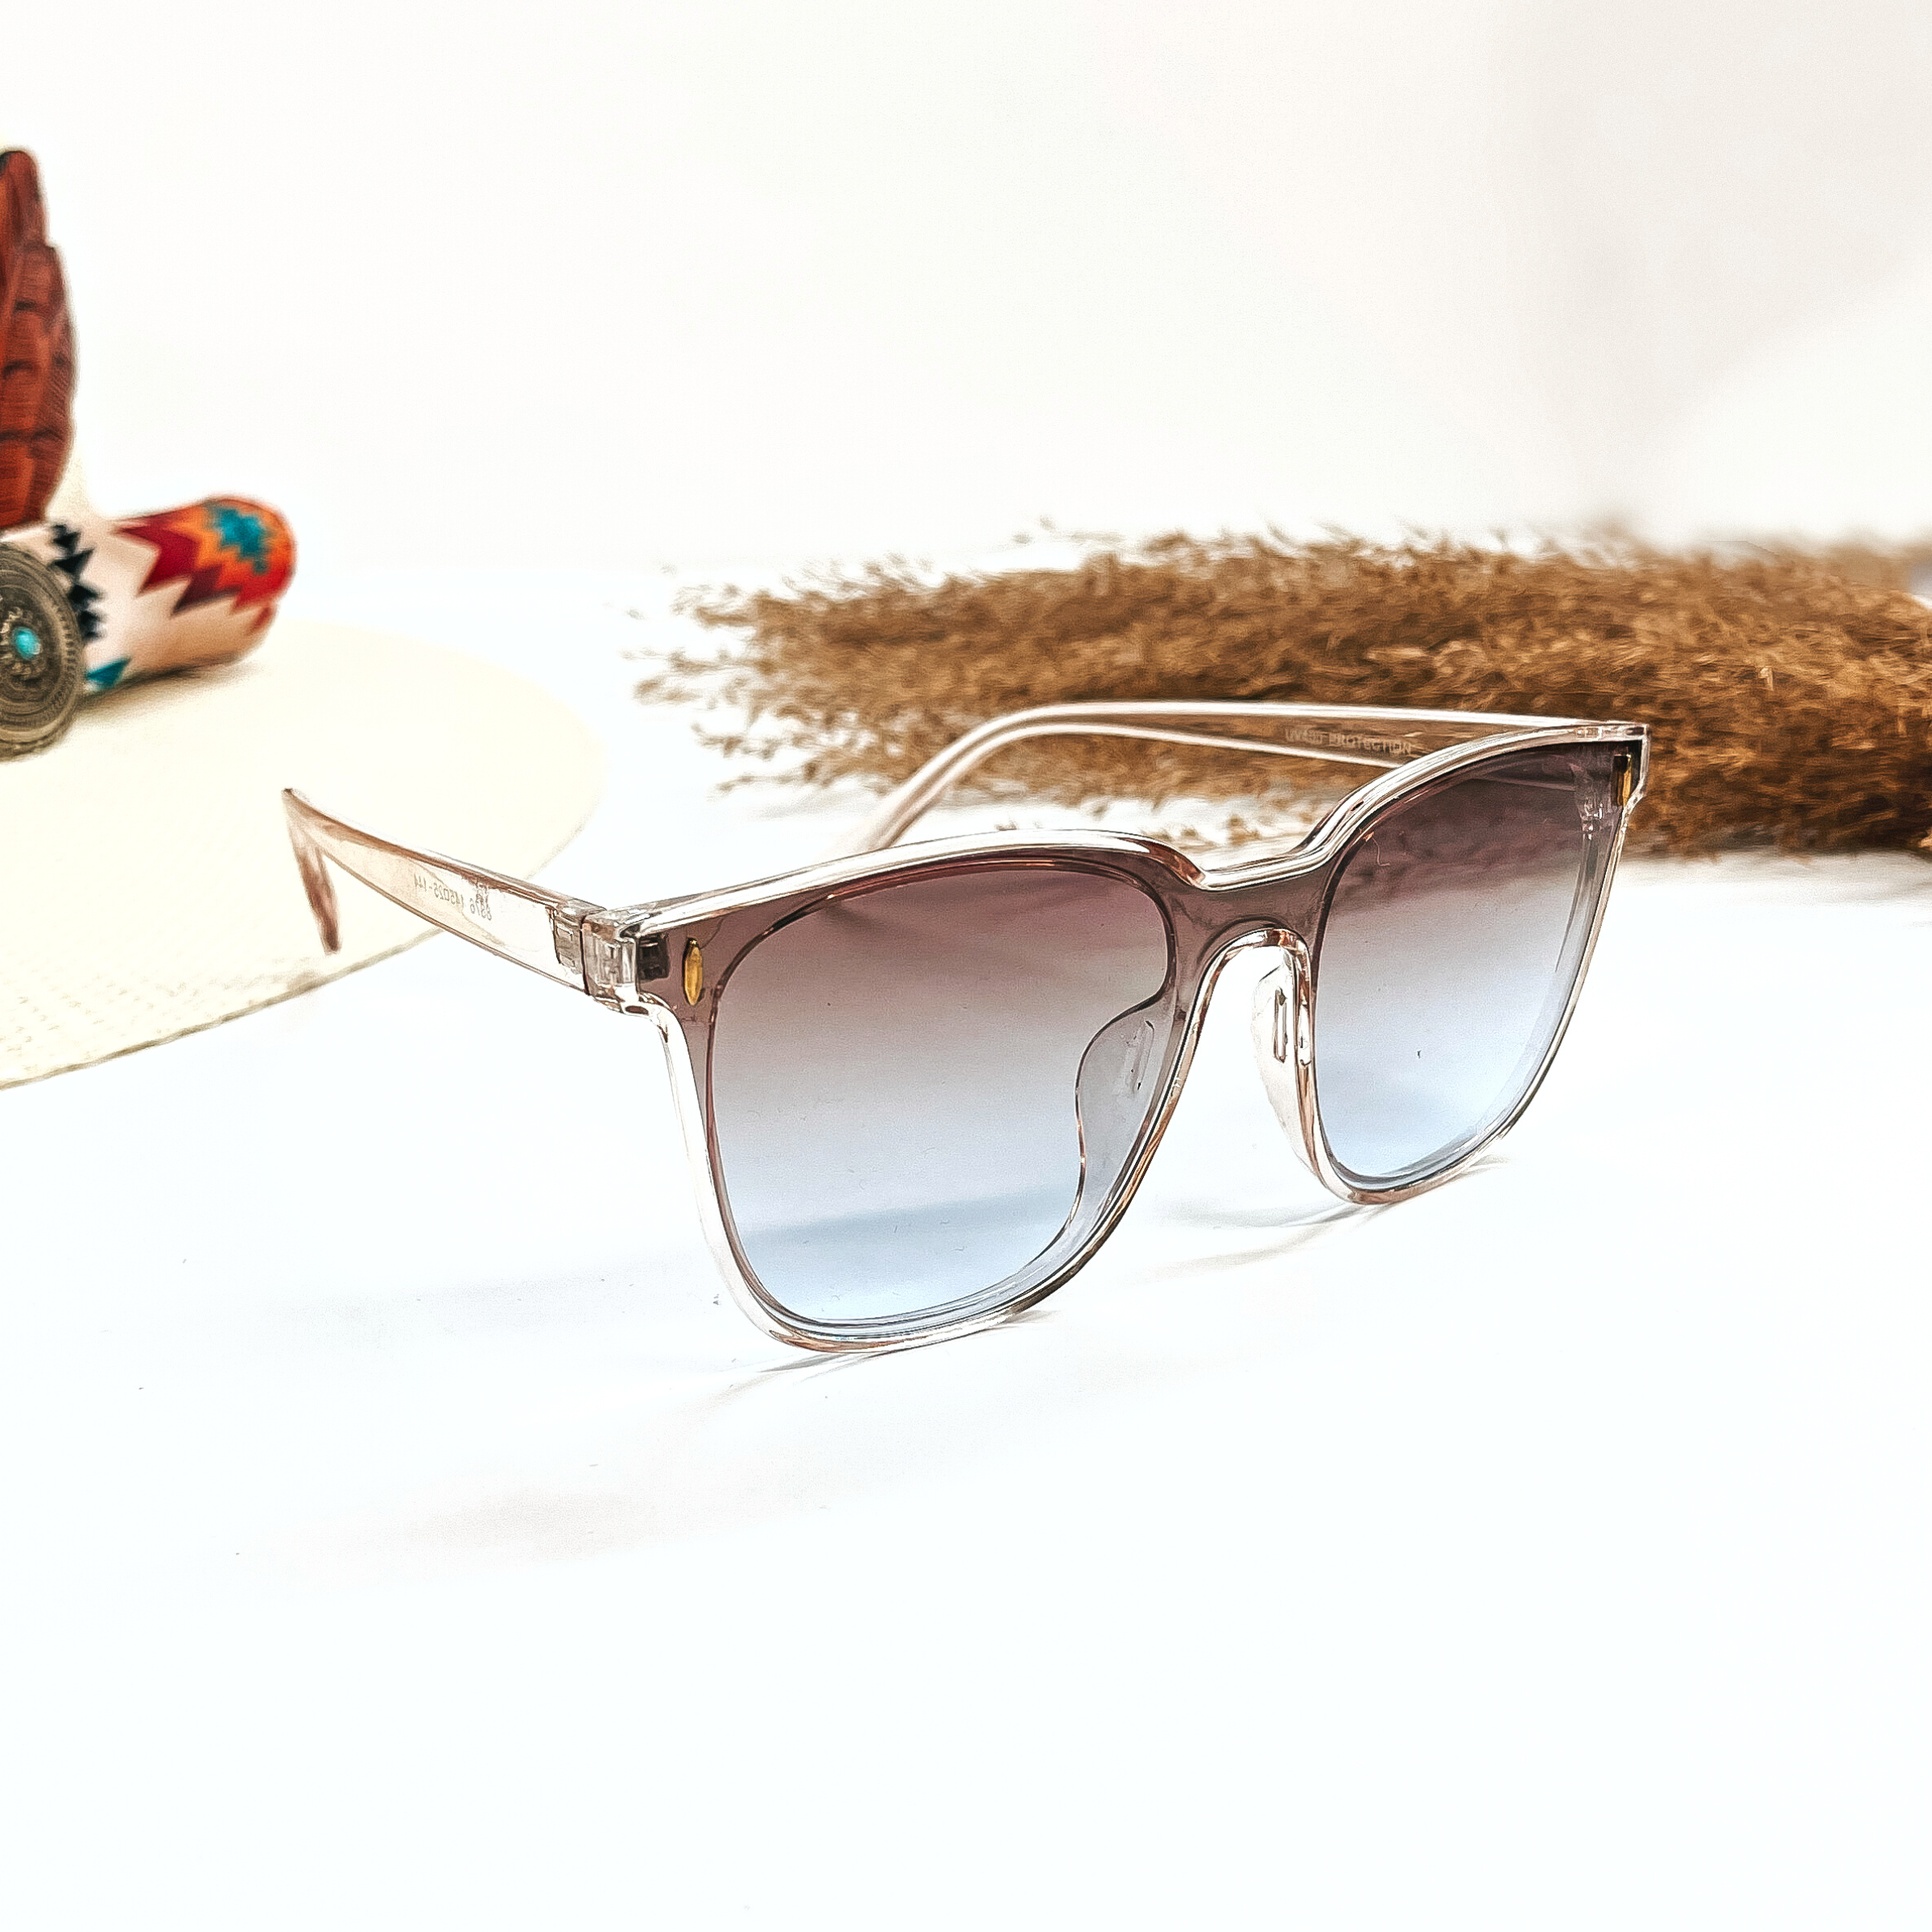 This is a pair of wayfarer style sunglasses with a transparent/clear light pink frame,  brown/light grey gradient lense with a gold tone detailing. These sunglasses are taken on a white  background, there is a straw hat with a colorful aztec print hat band and a brown plant  in the side as decor.